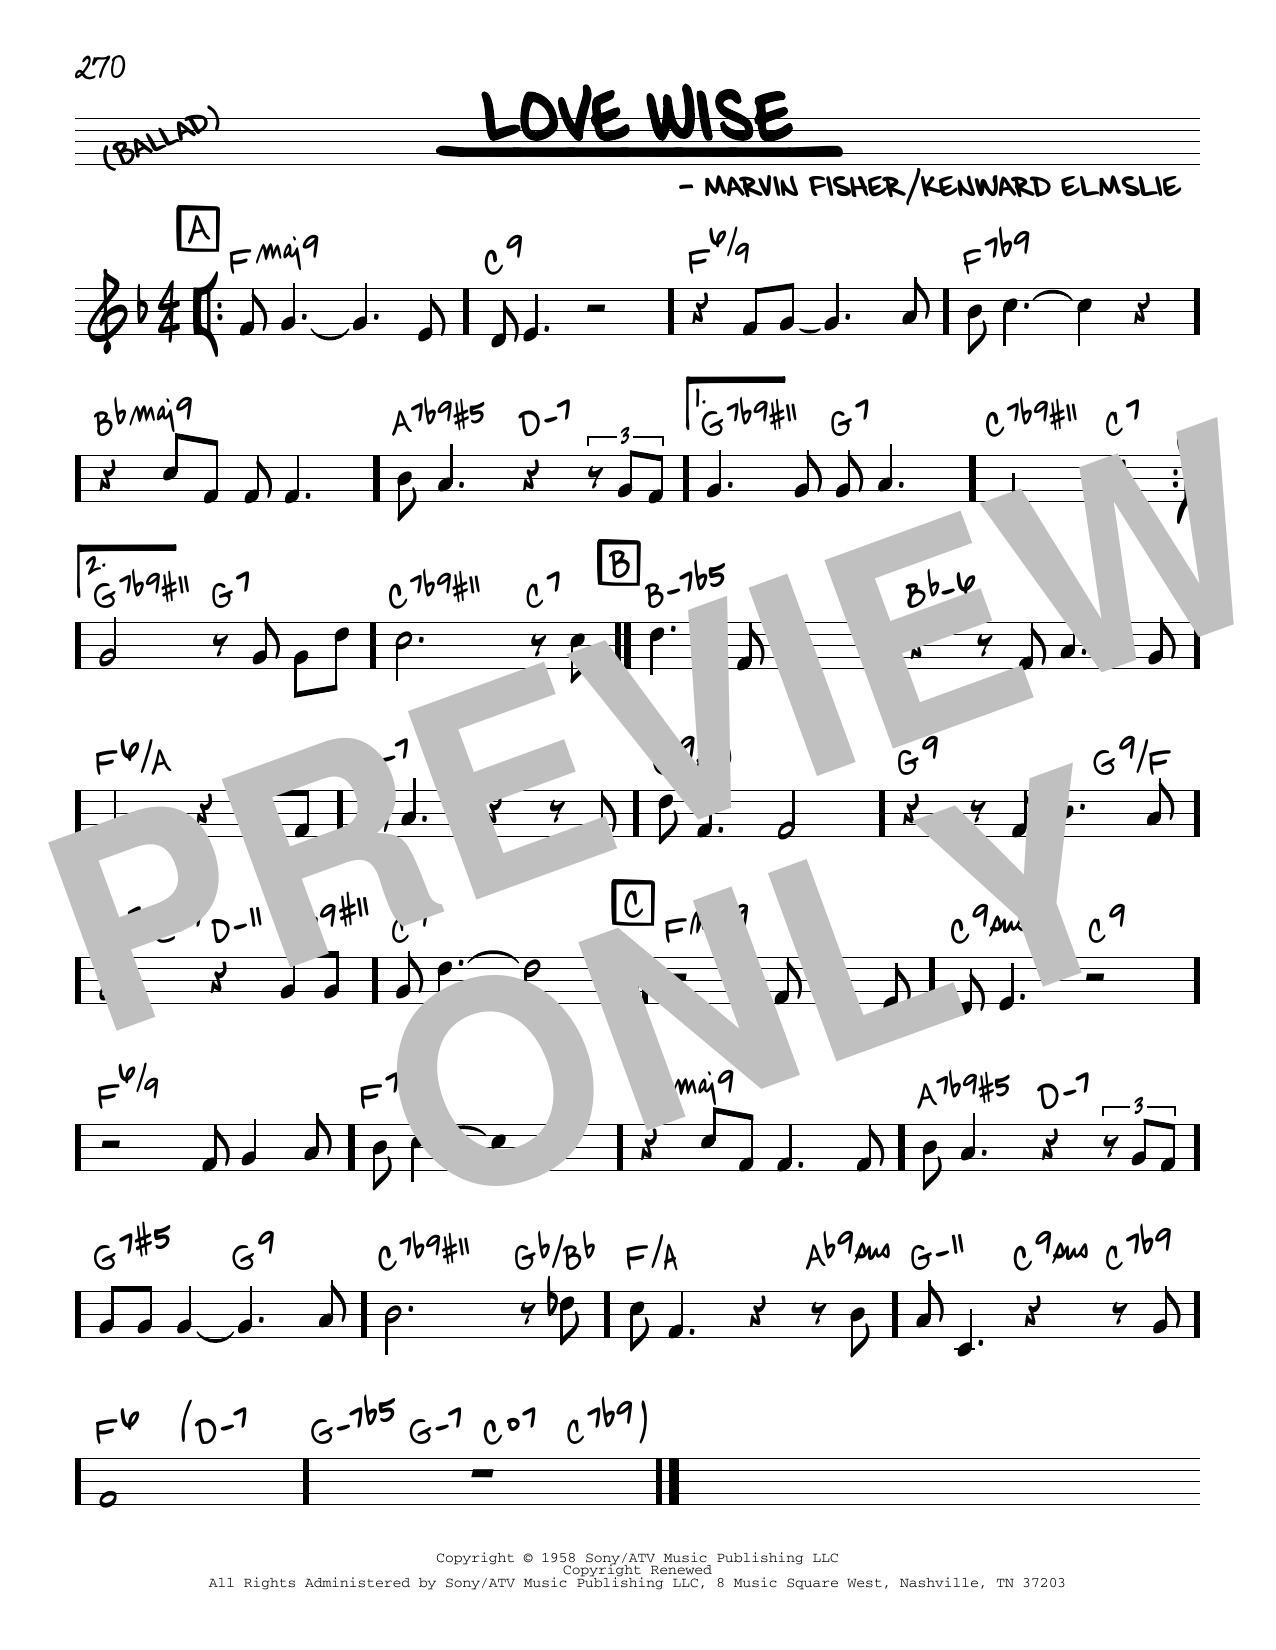 Download Marvin Fisher Love Wise Sheet Music